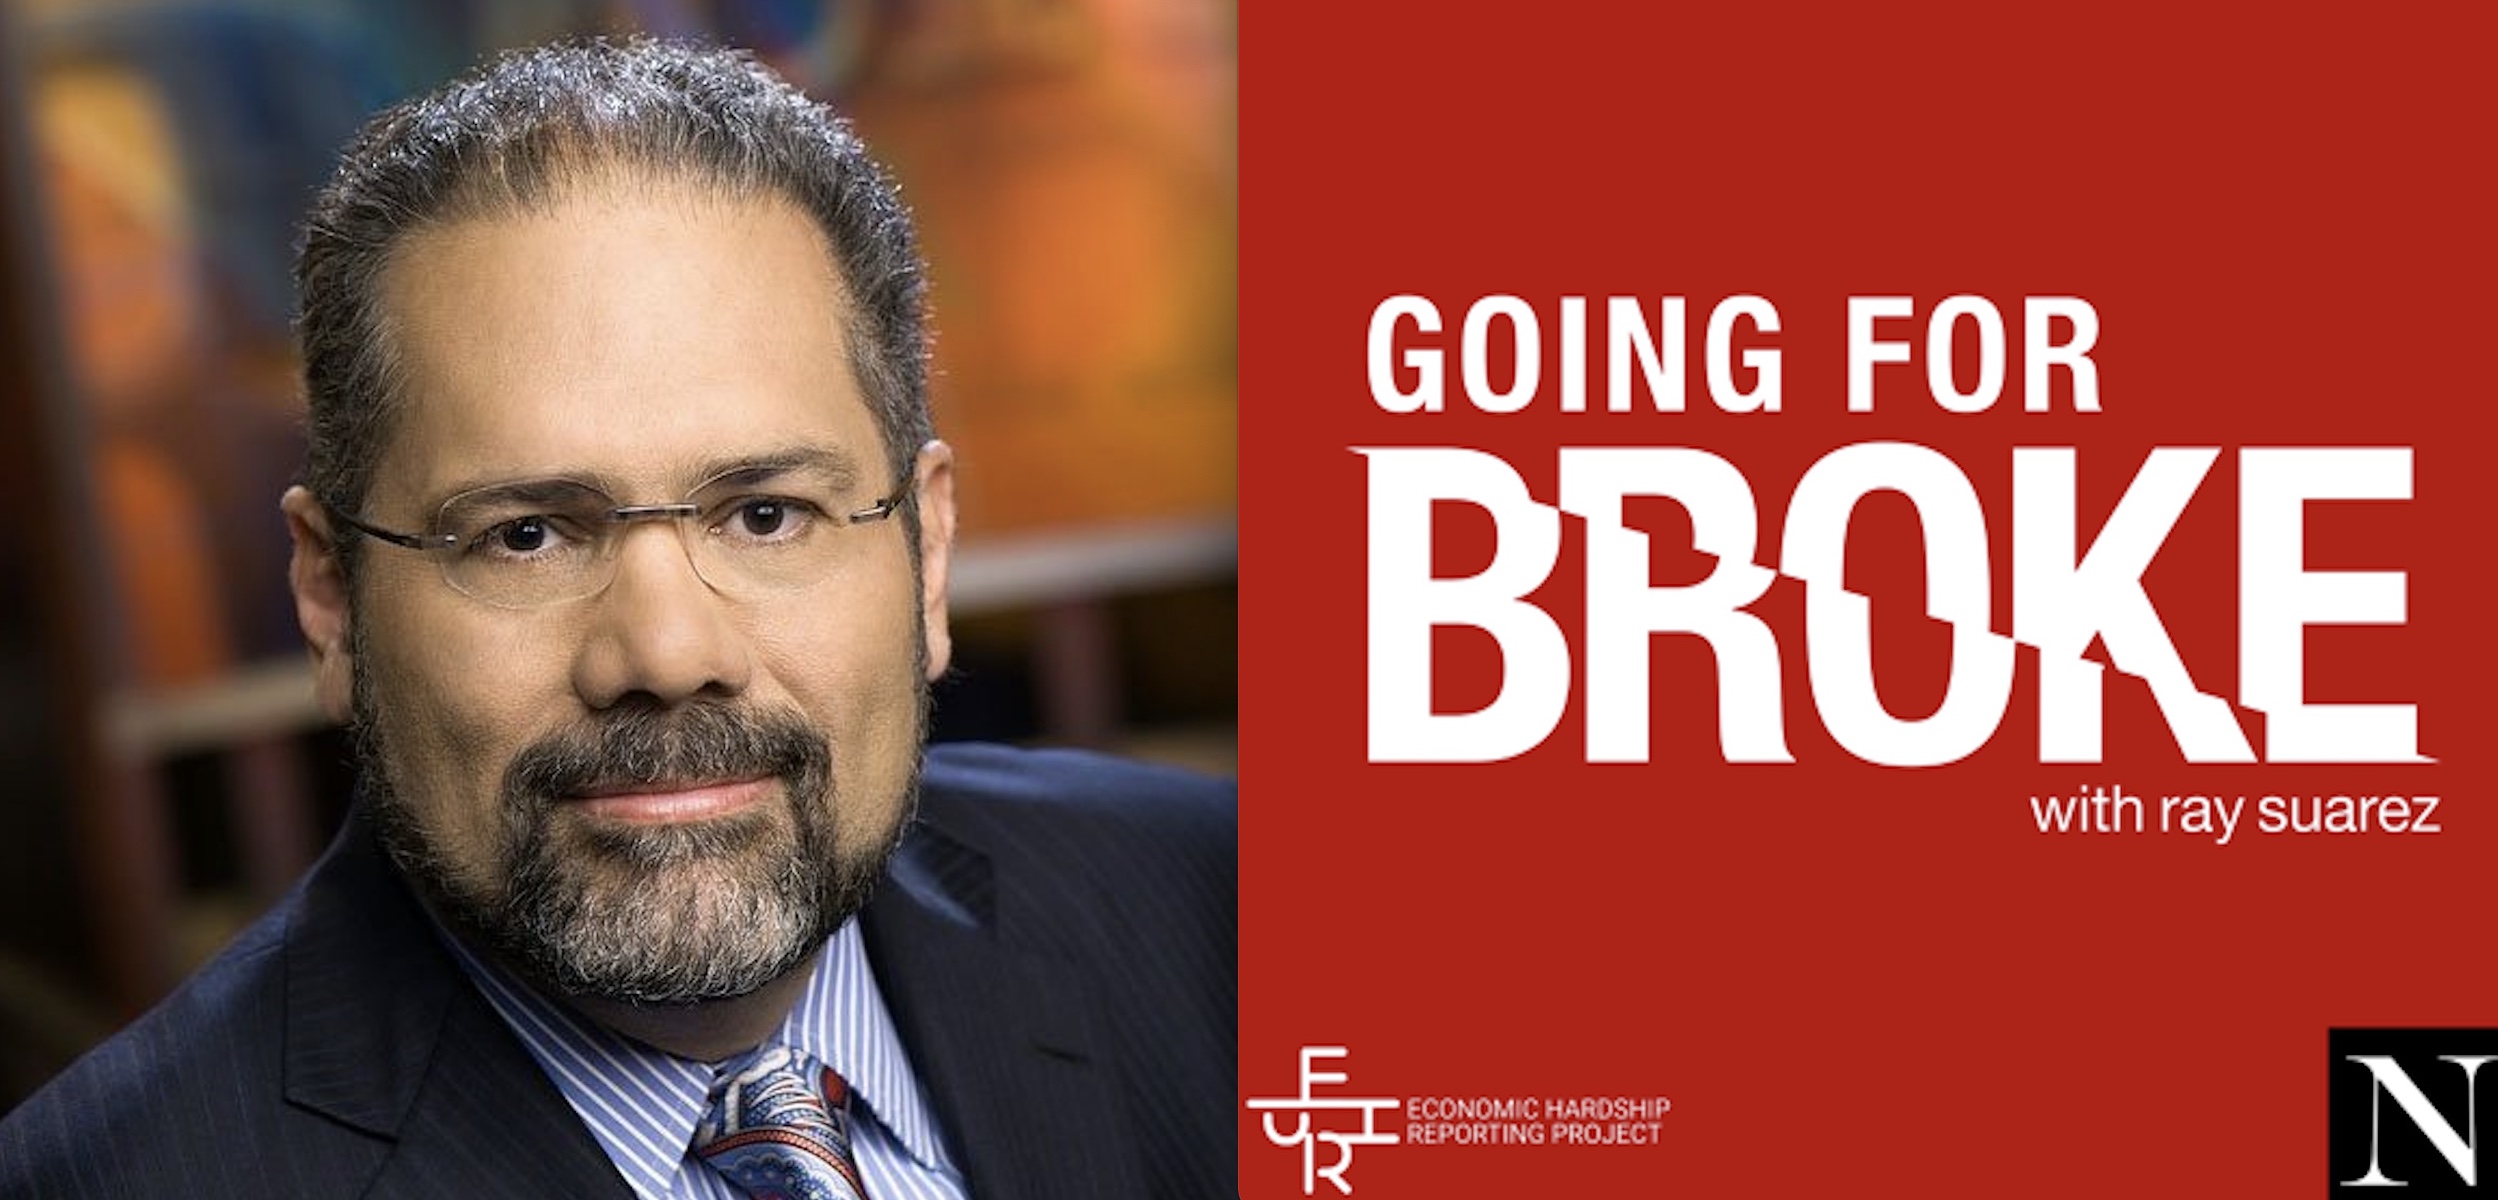 “The Nation” Launches “Going for Broke With Ray Suarez,” a New Podcast Hosted by the Veteran Broadcast Journalist